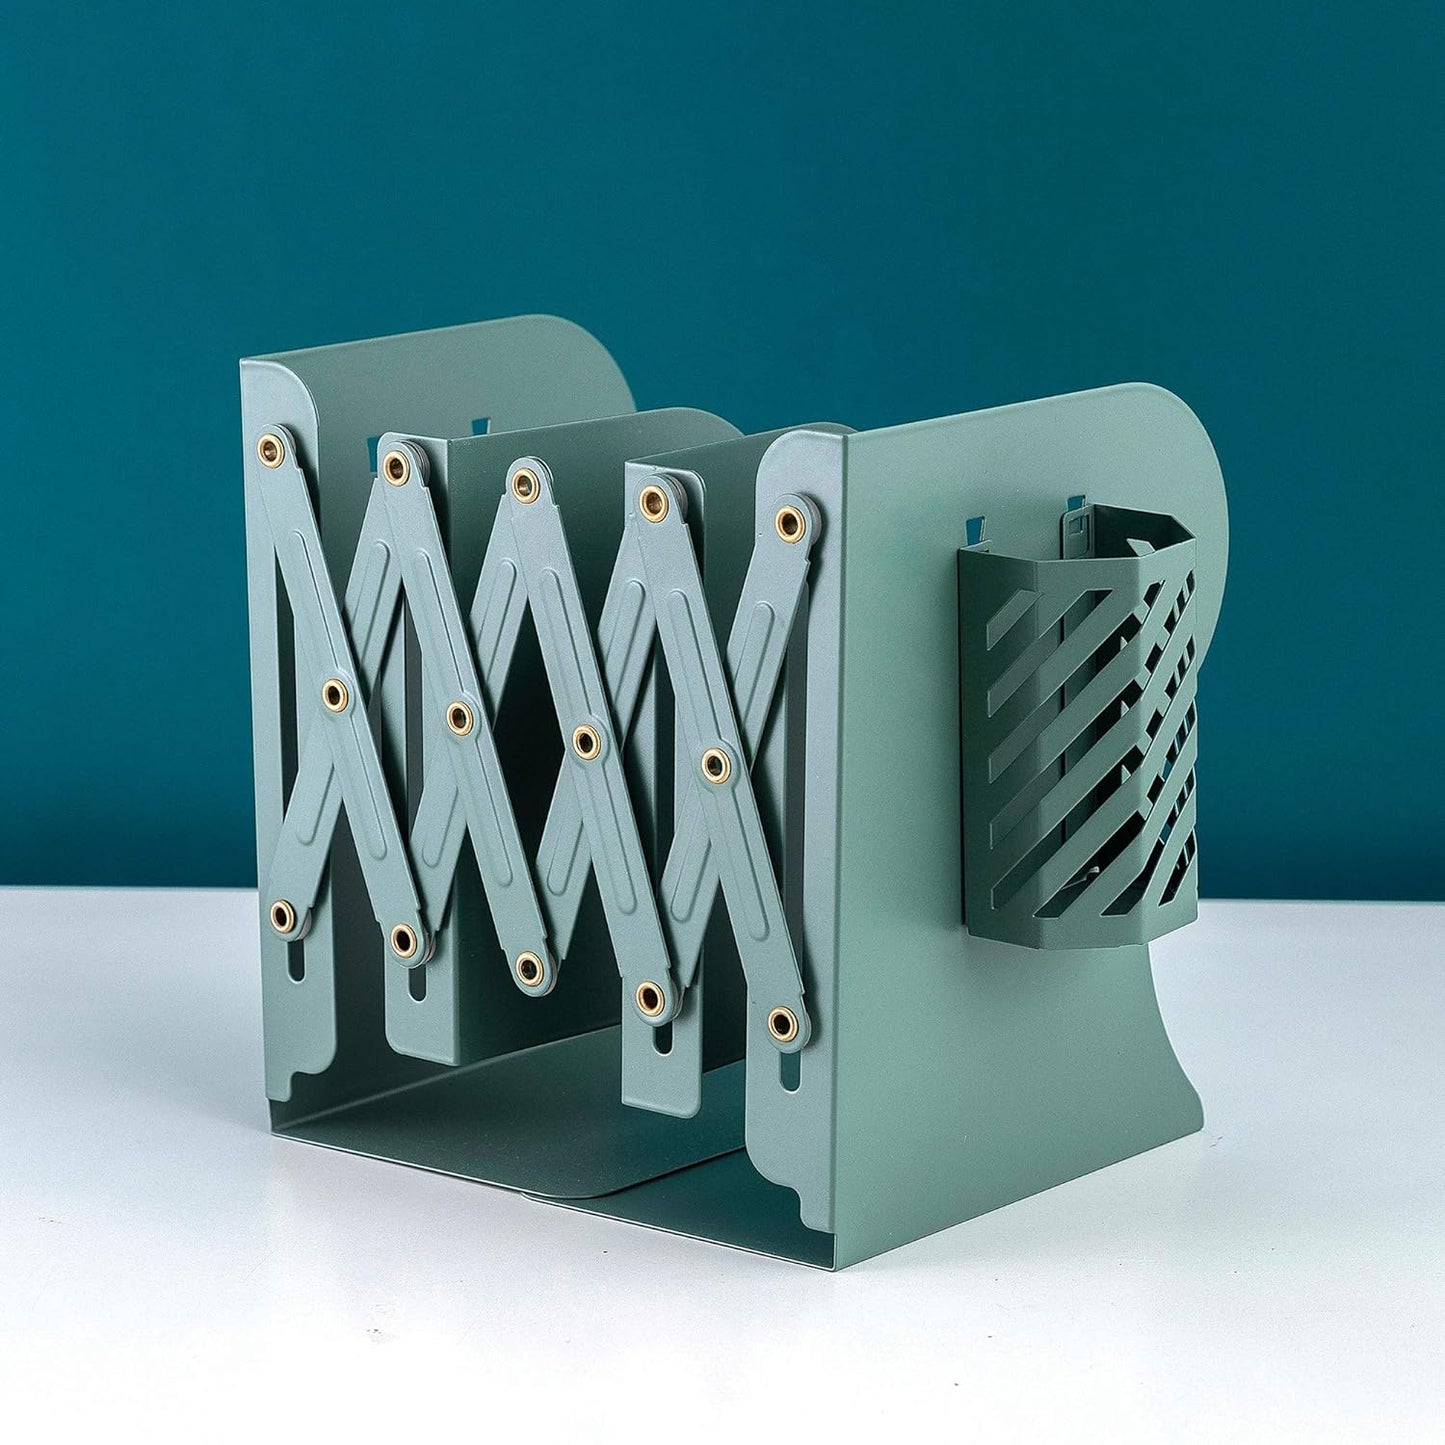  Bust-Down Books - Expandable Metal Bookshelf Bookends For Heavy Books (Green)